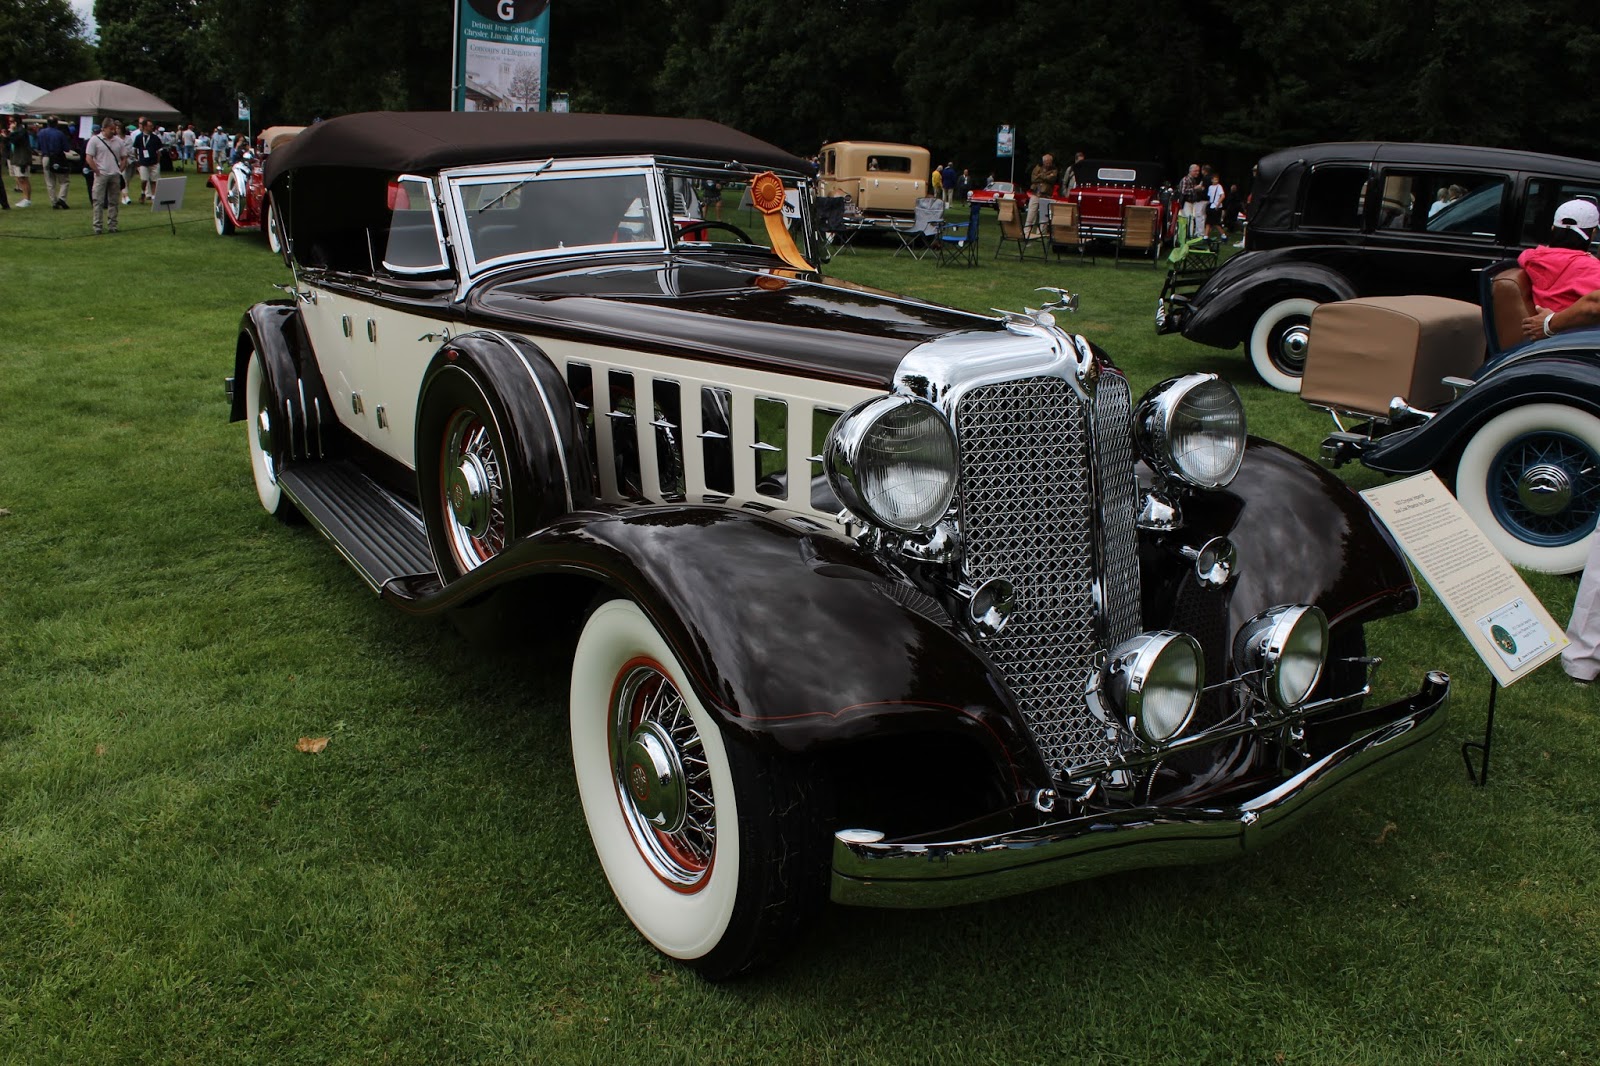 Patio Boat: Concours d'Elegance of America: American Prewar Cars from ...